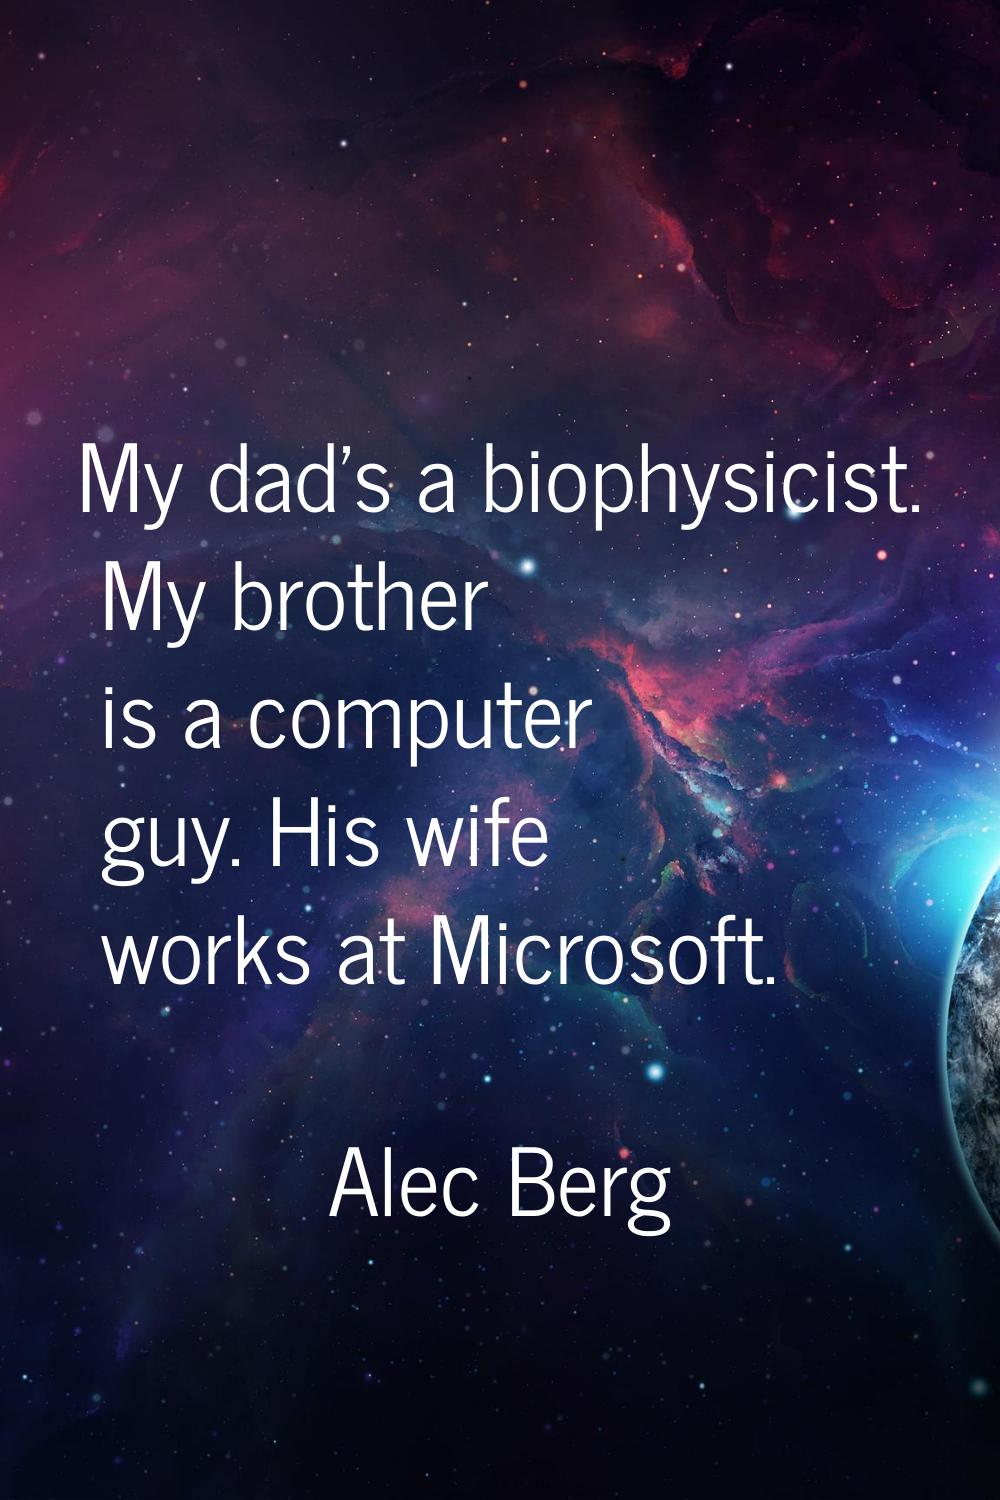 My dad's a biophysicist. My brother is a computer guy. His wife works at Microsoft.